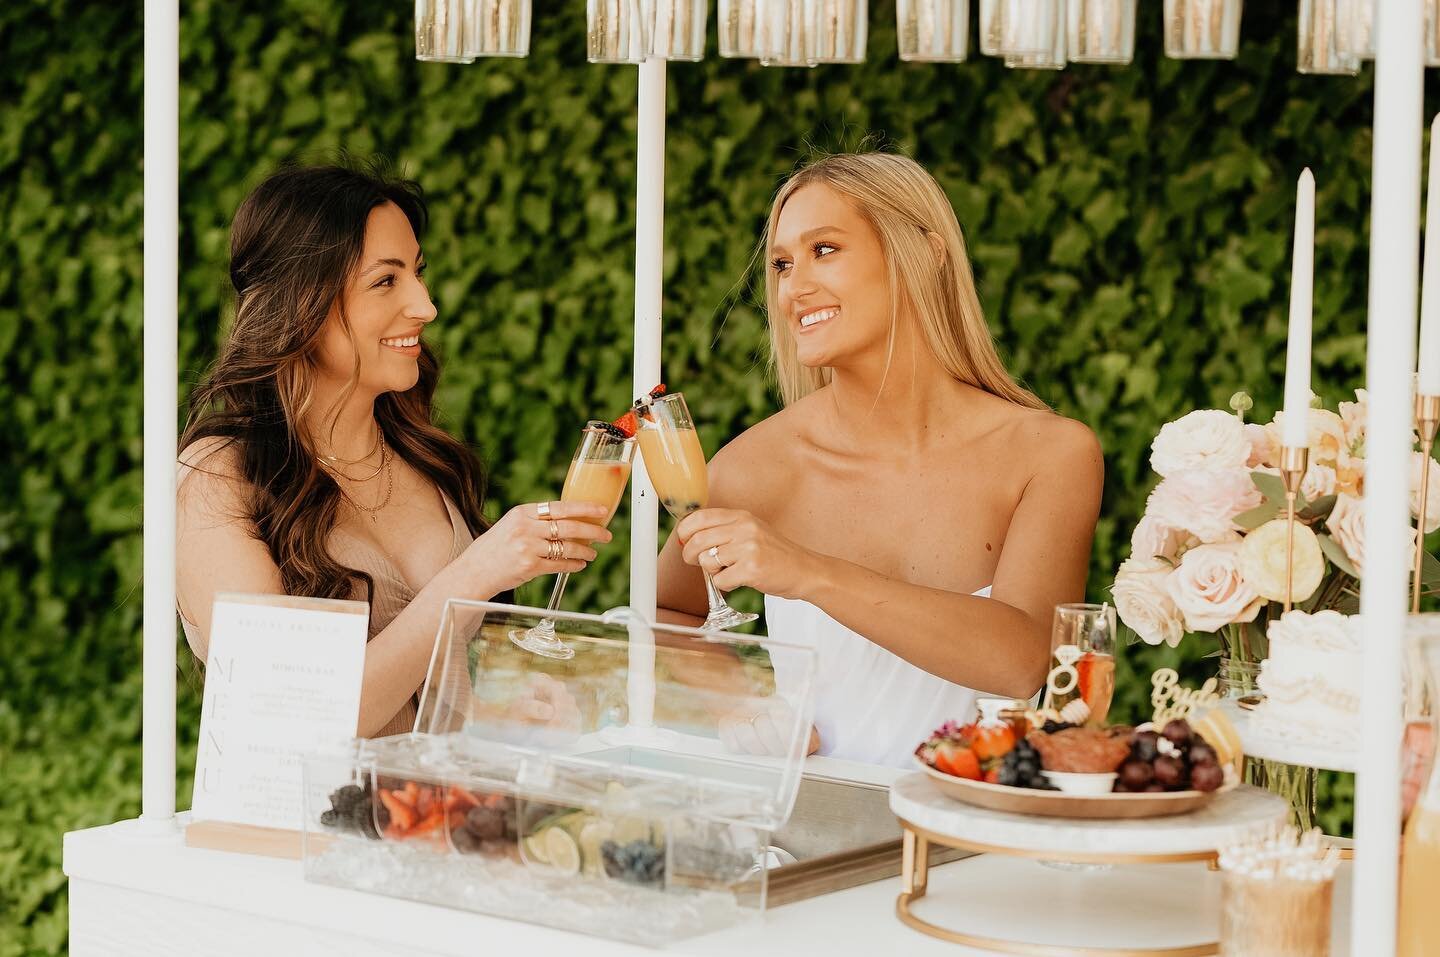 CHEERS to the weekend!! 🍾

Celebrating with a mimosa bar on this Saturday ☀️